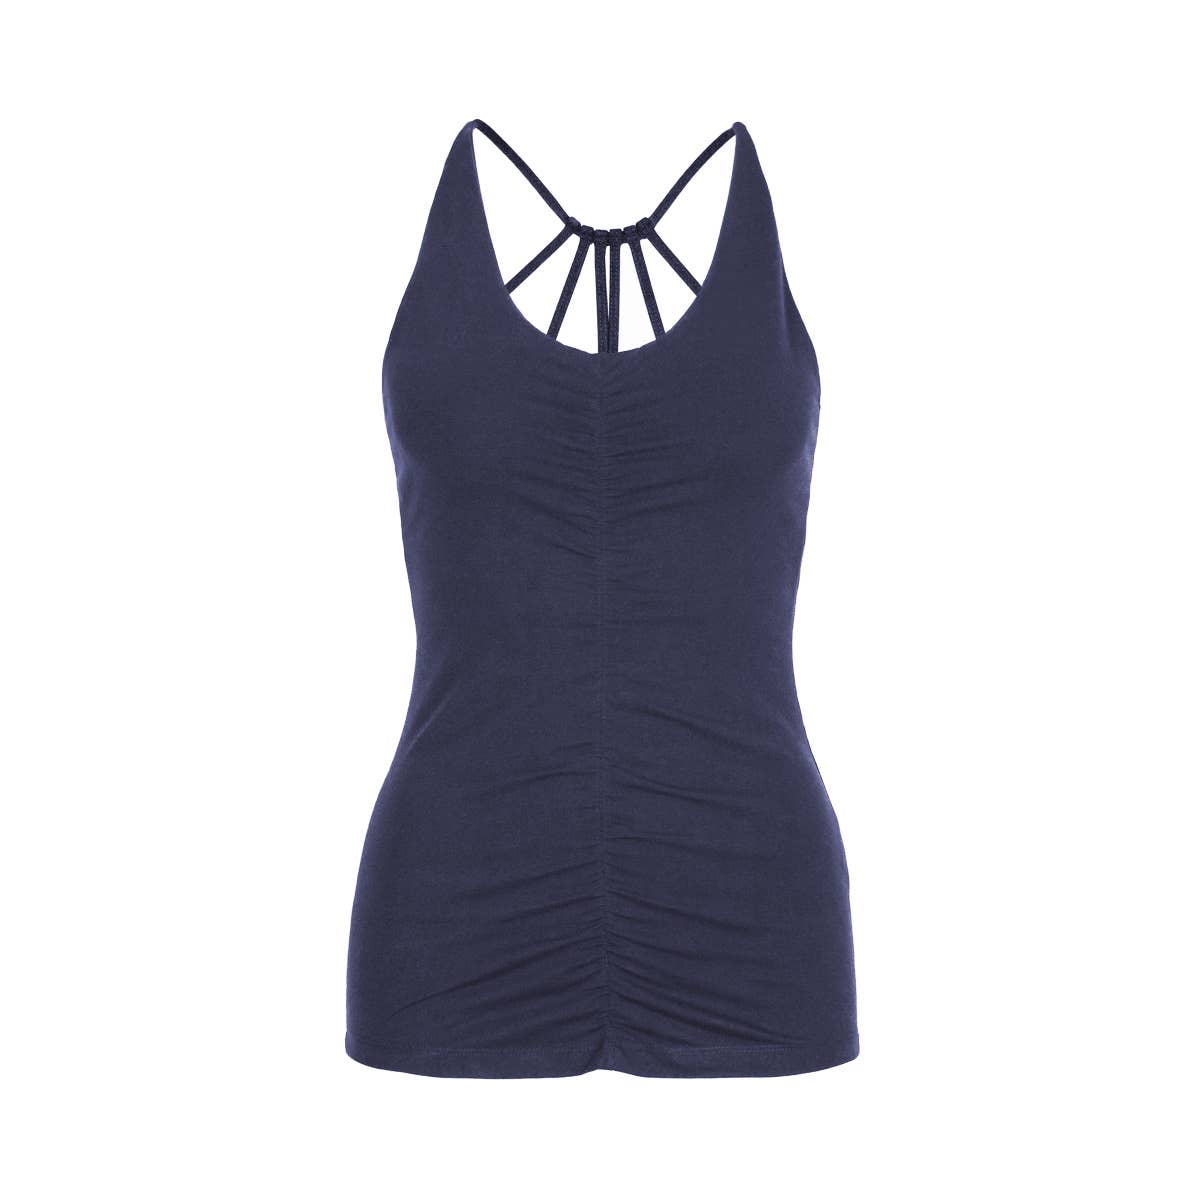 Nicole top with midnight blue crisscross straps